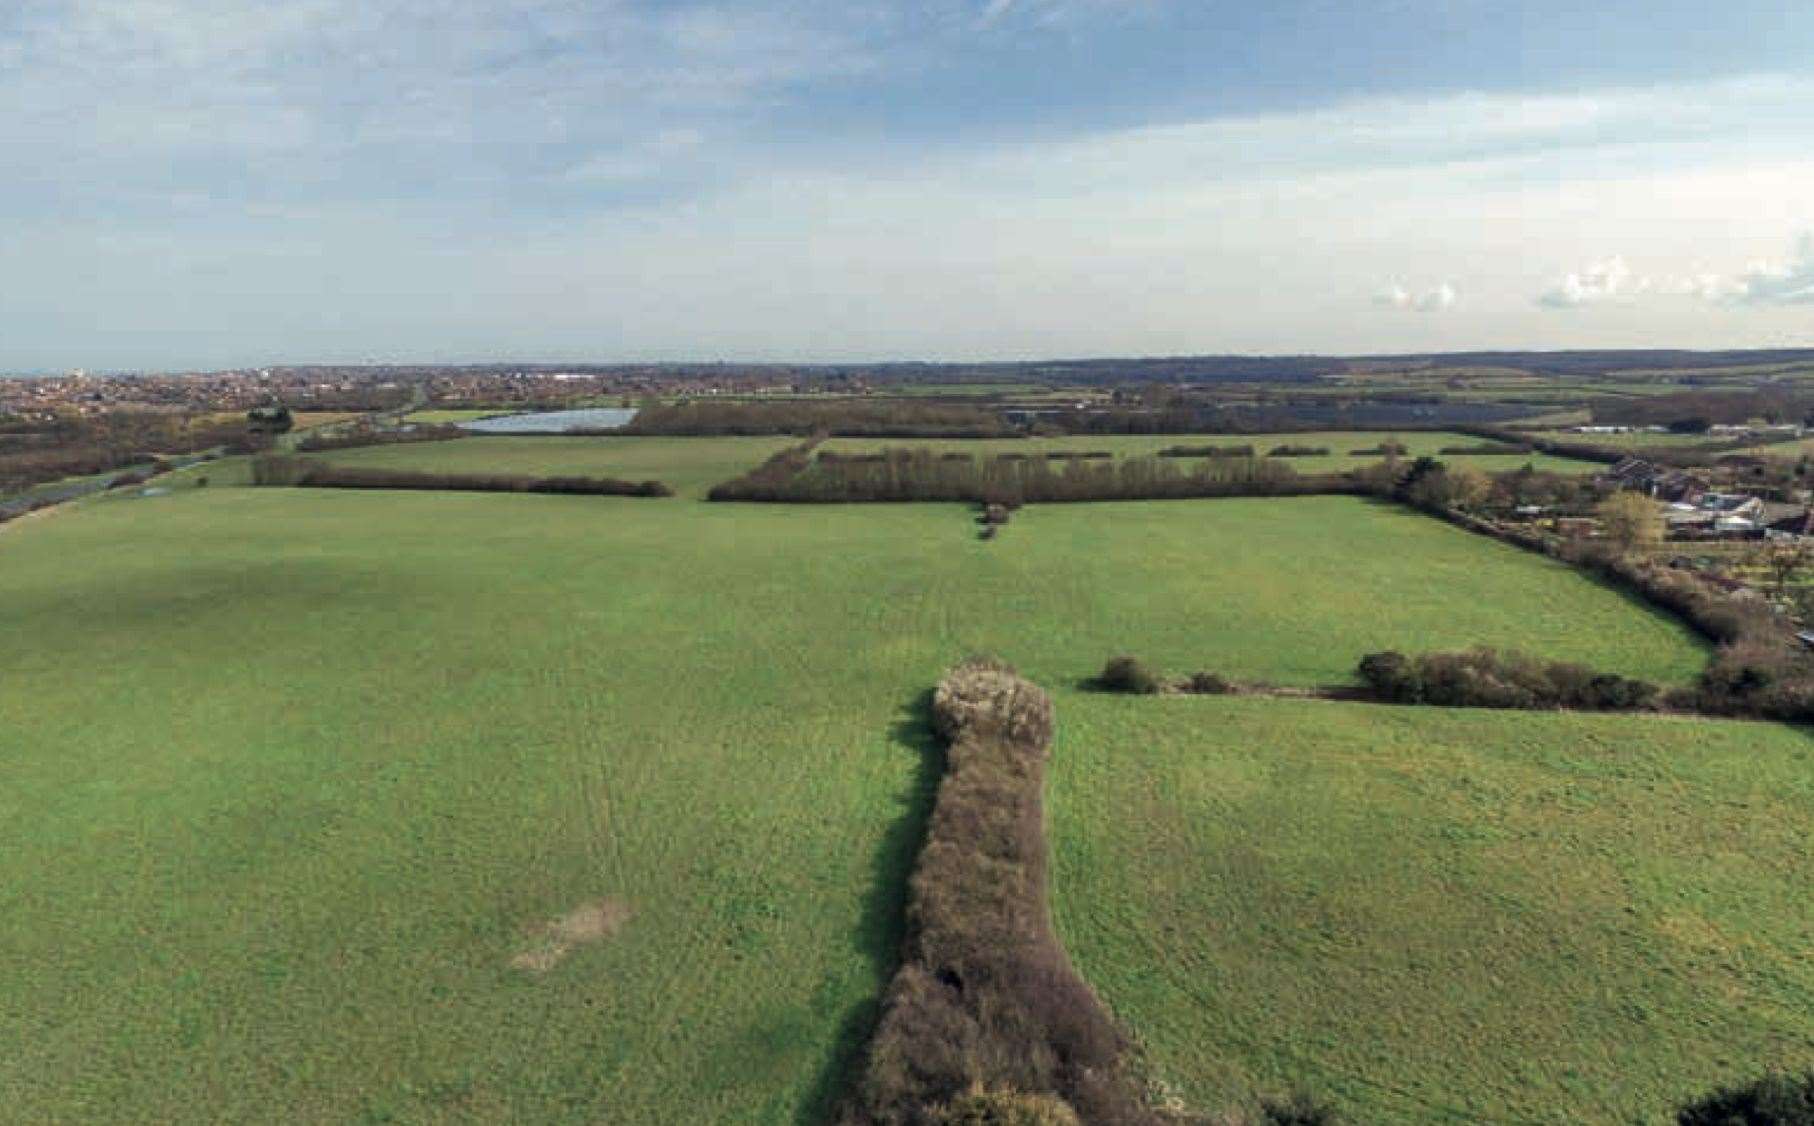 The sprawling site at Bodkin Farm in Chestfield, which is being put forward for housing. Pic: Picture: Strutt & Parker